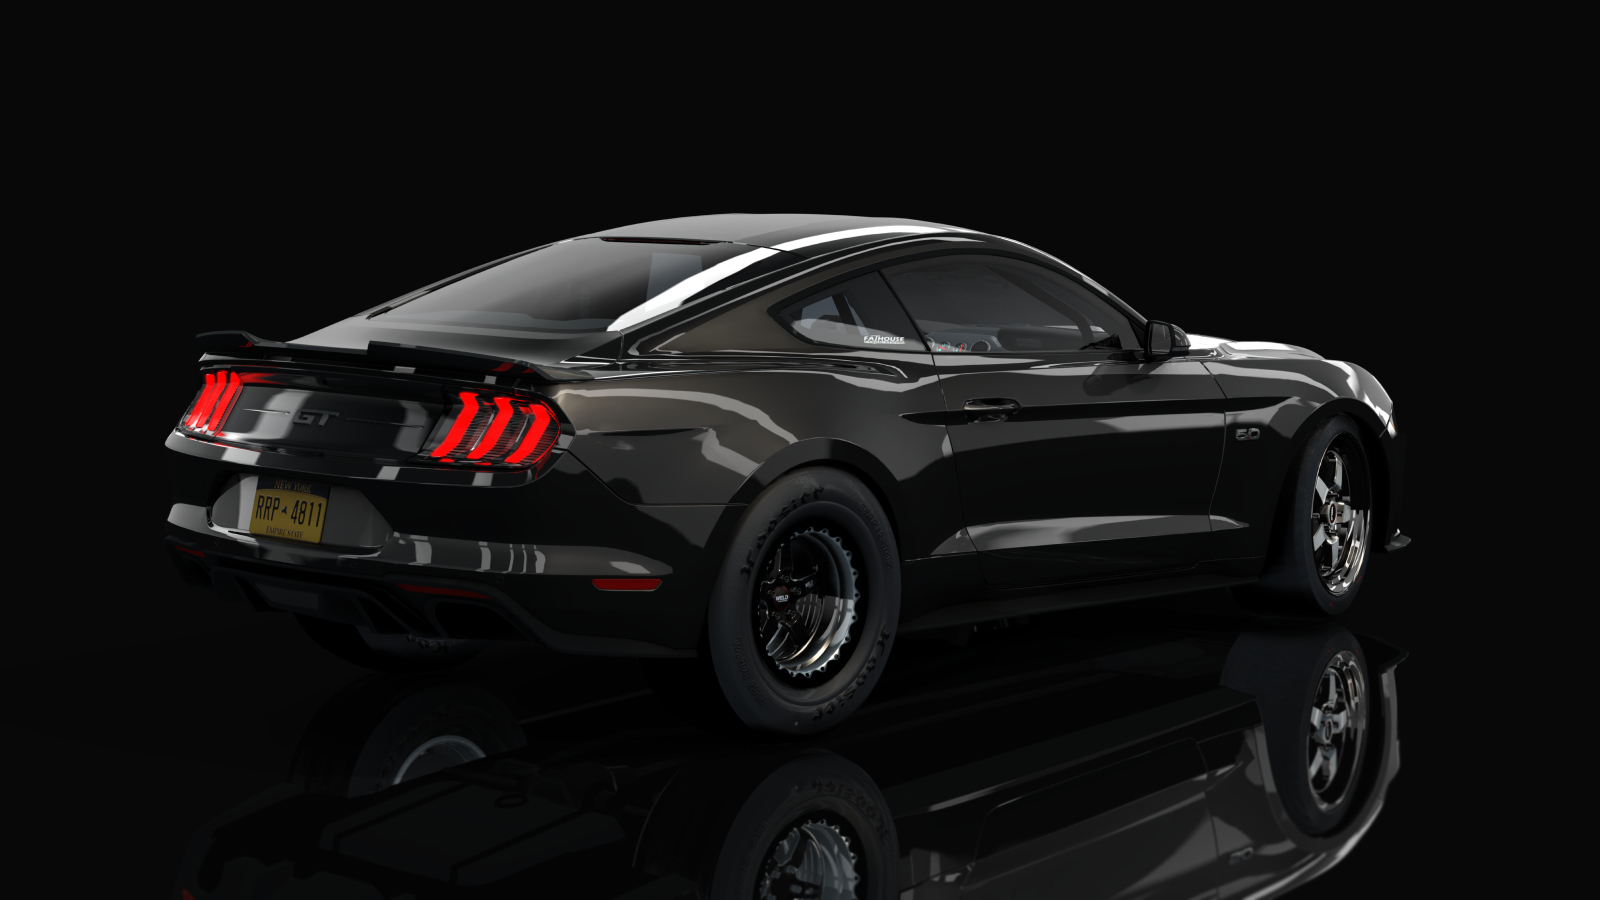 Ford Mustang GT 2018 1500Rx, skin Shadow_Black